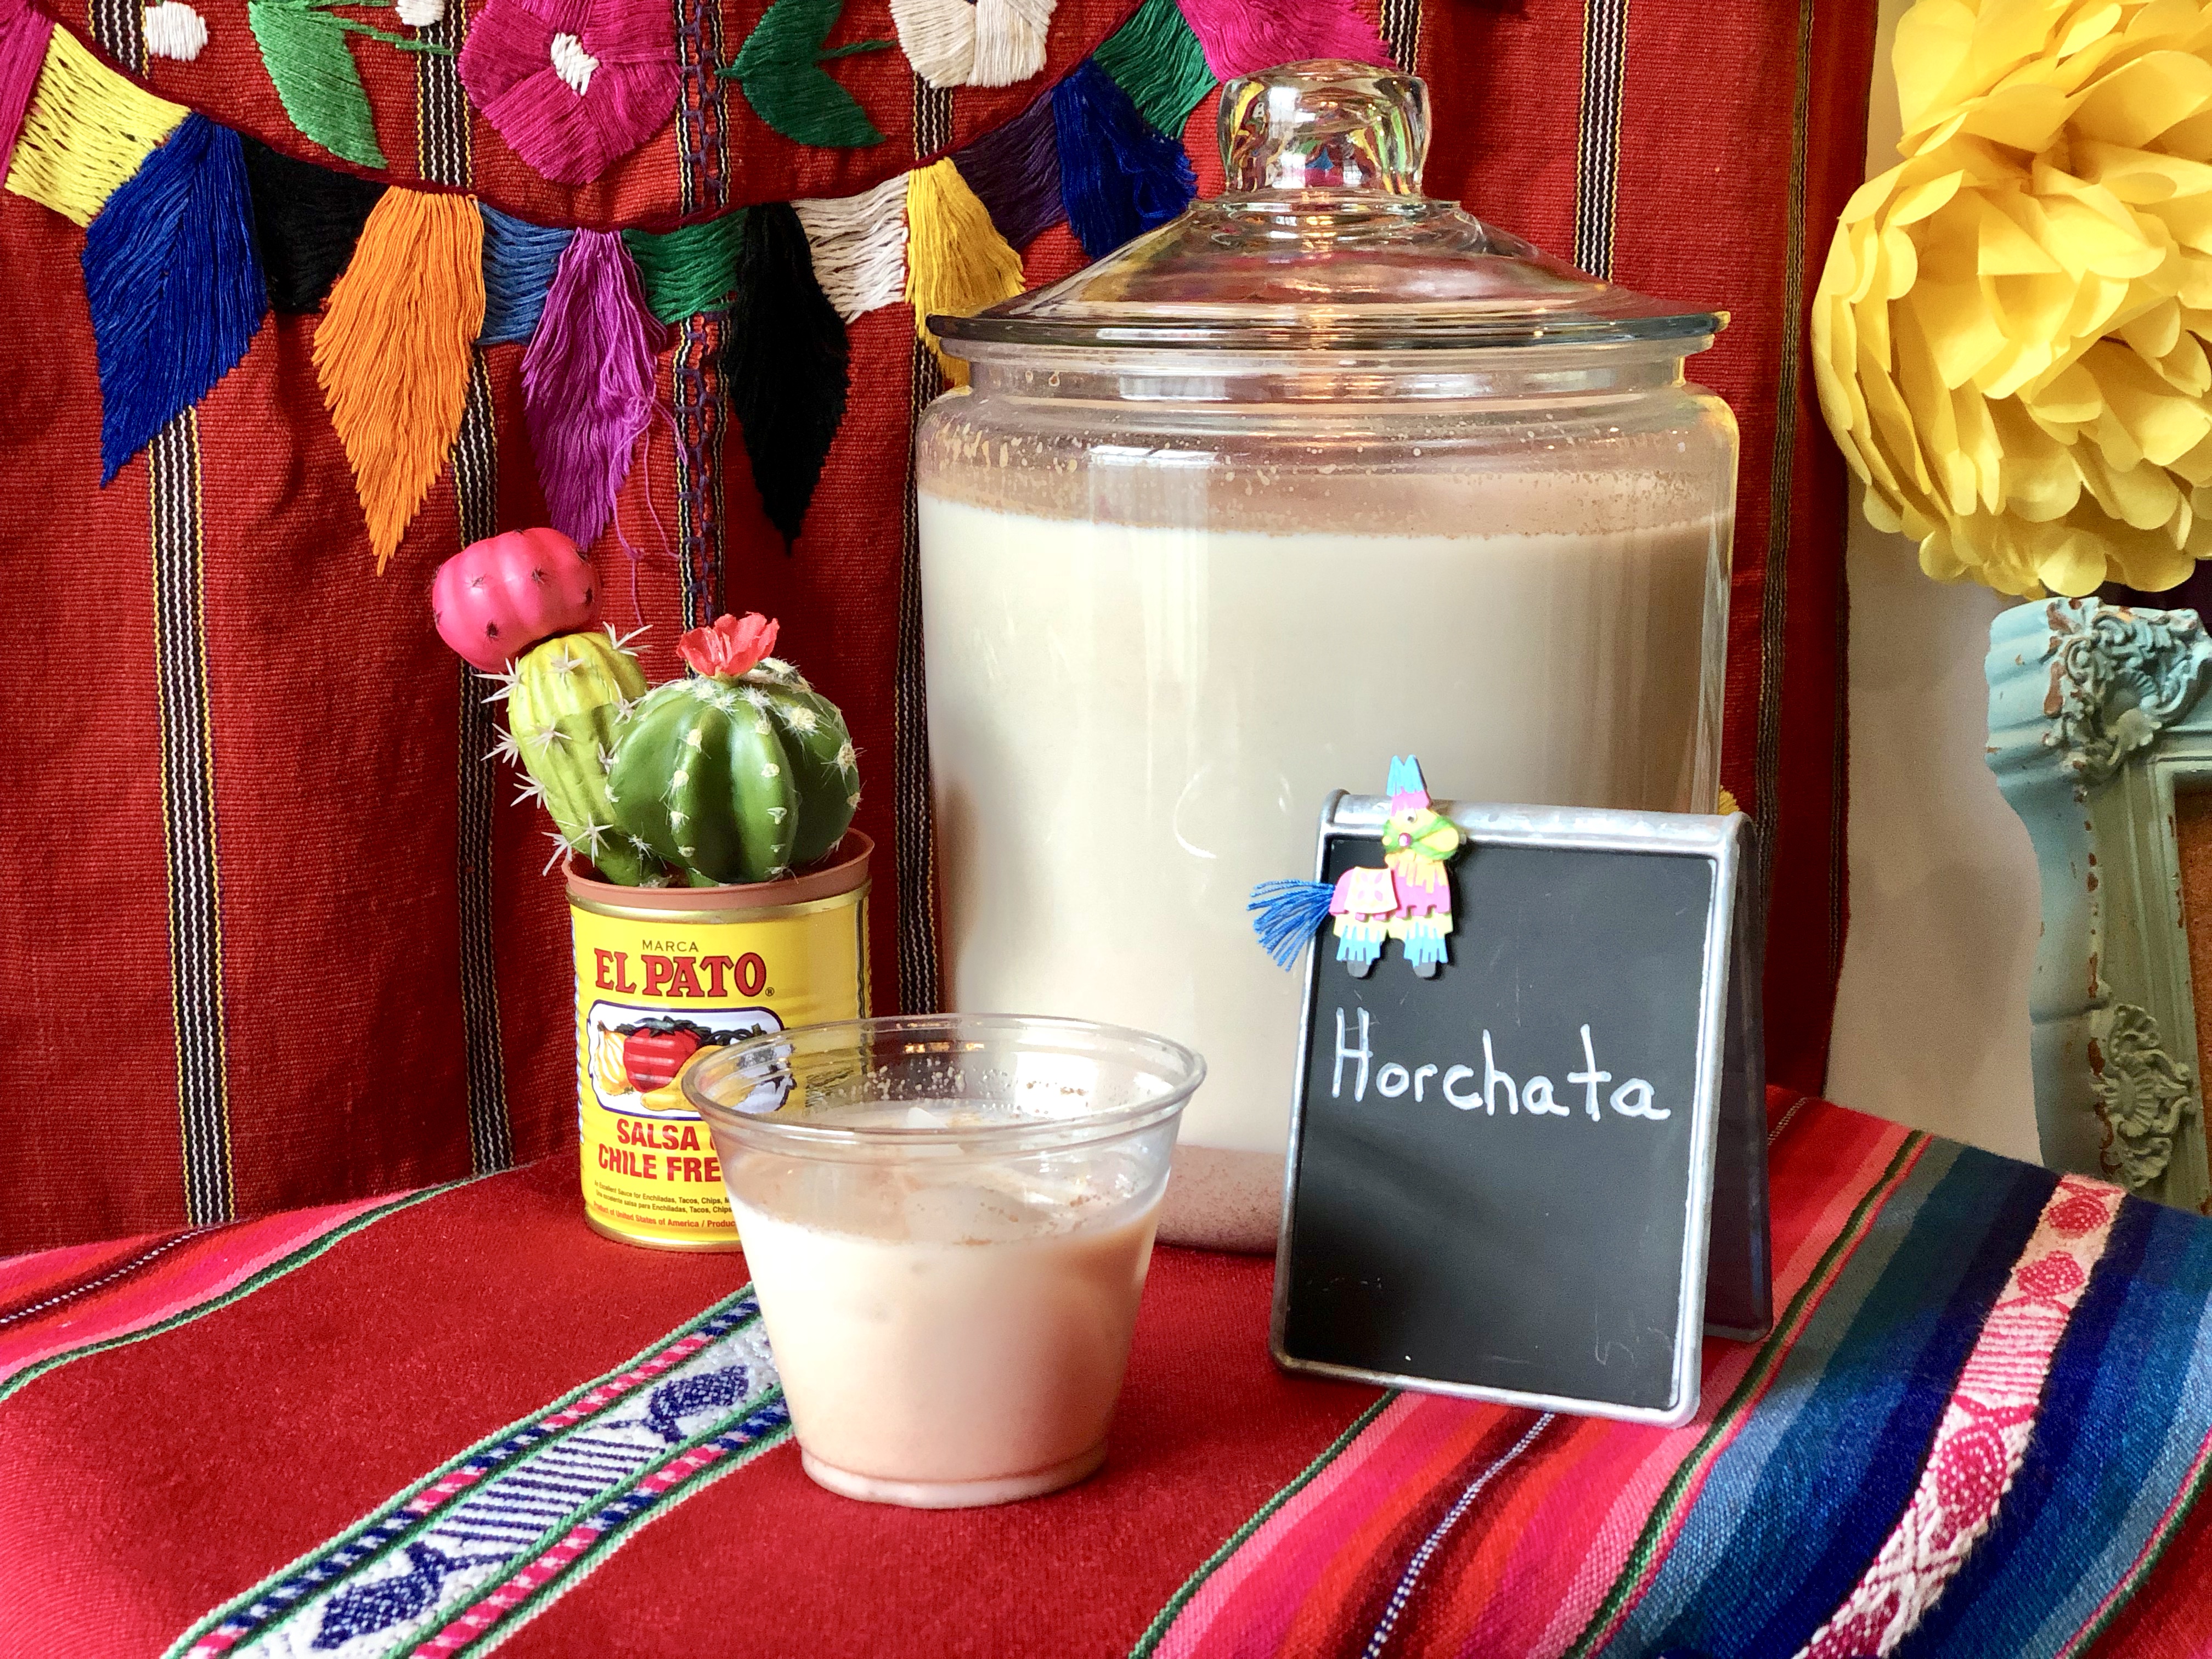 Mexican Horchata